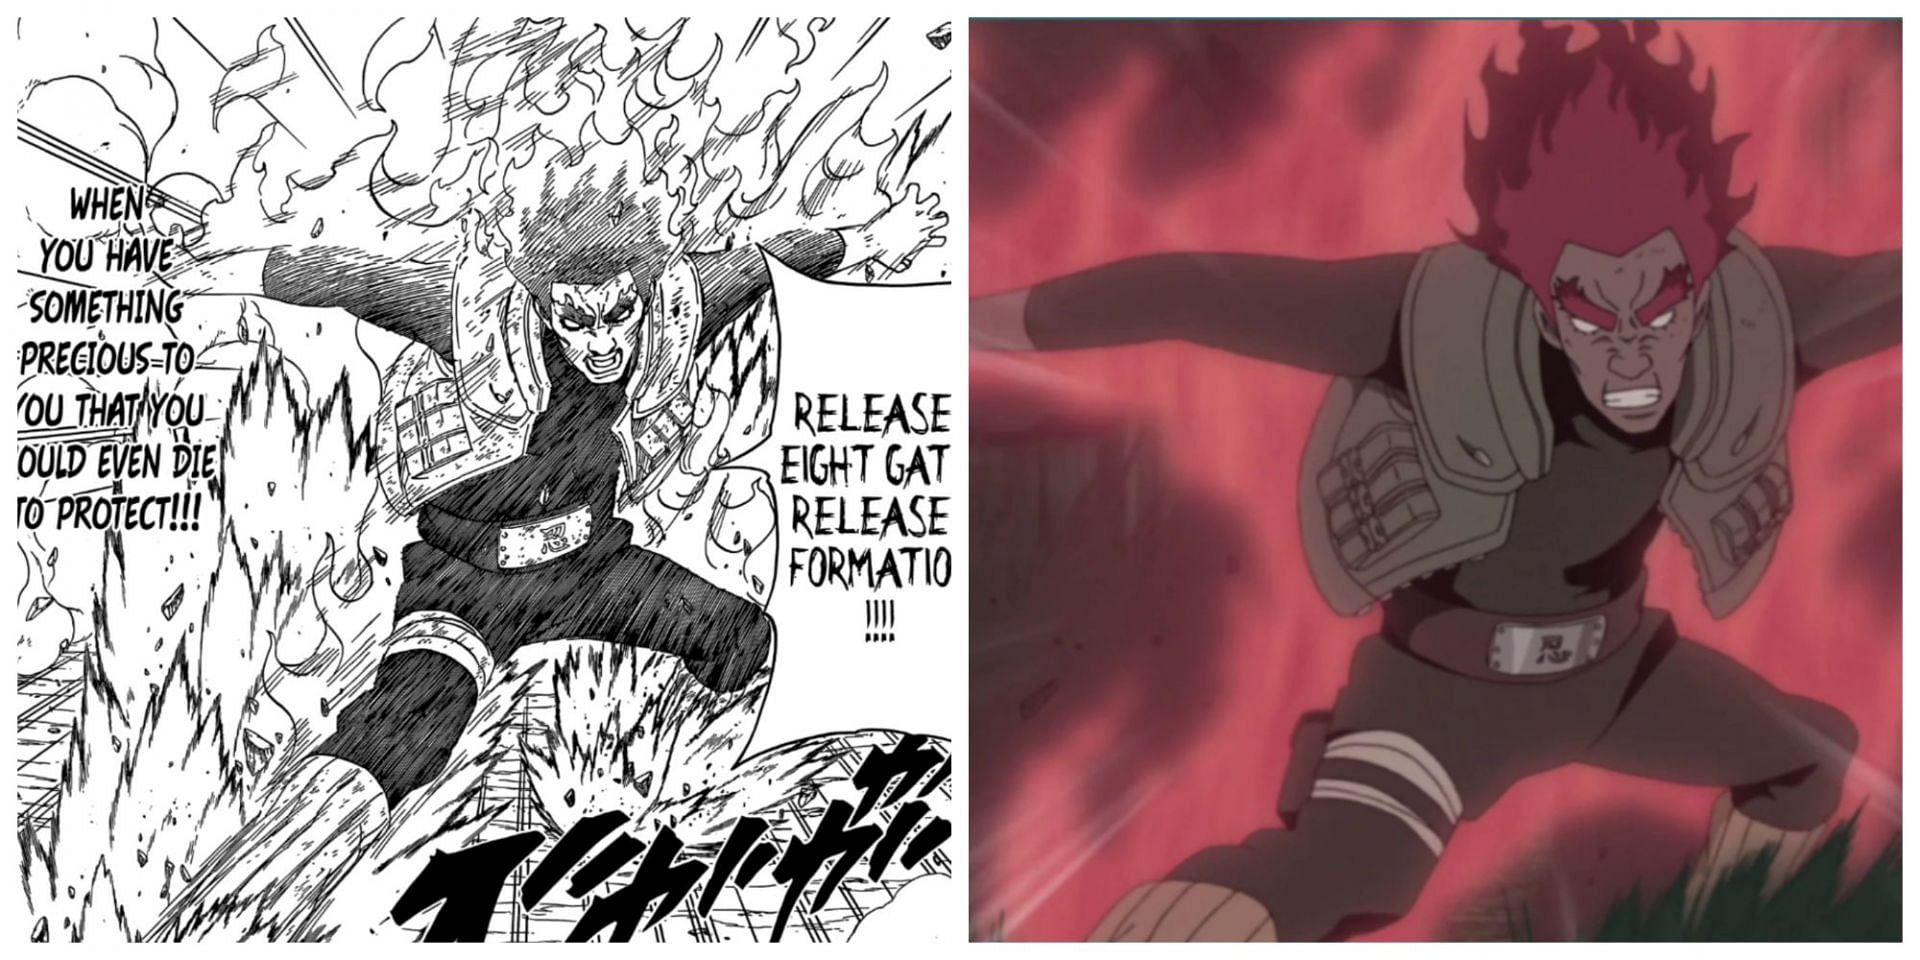 Might vs Madara fight in the Naruto series (images via Shueisha and Pierrot)